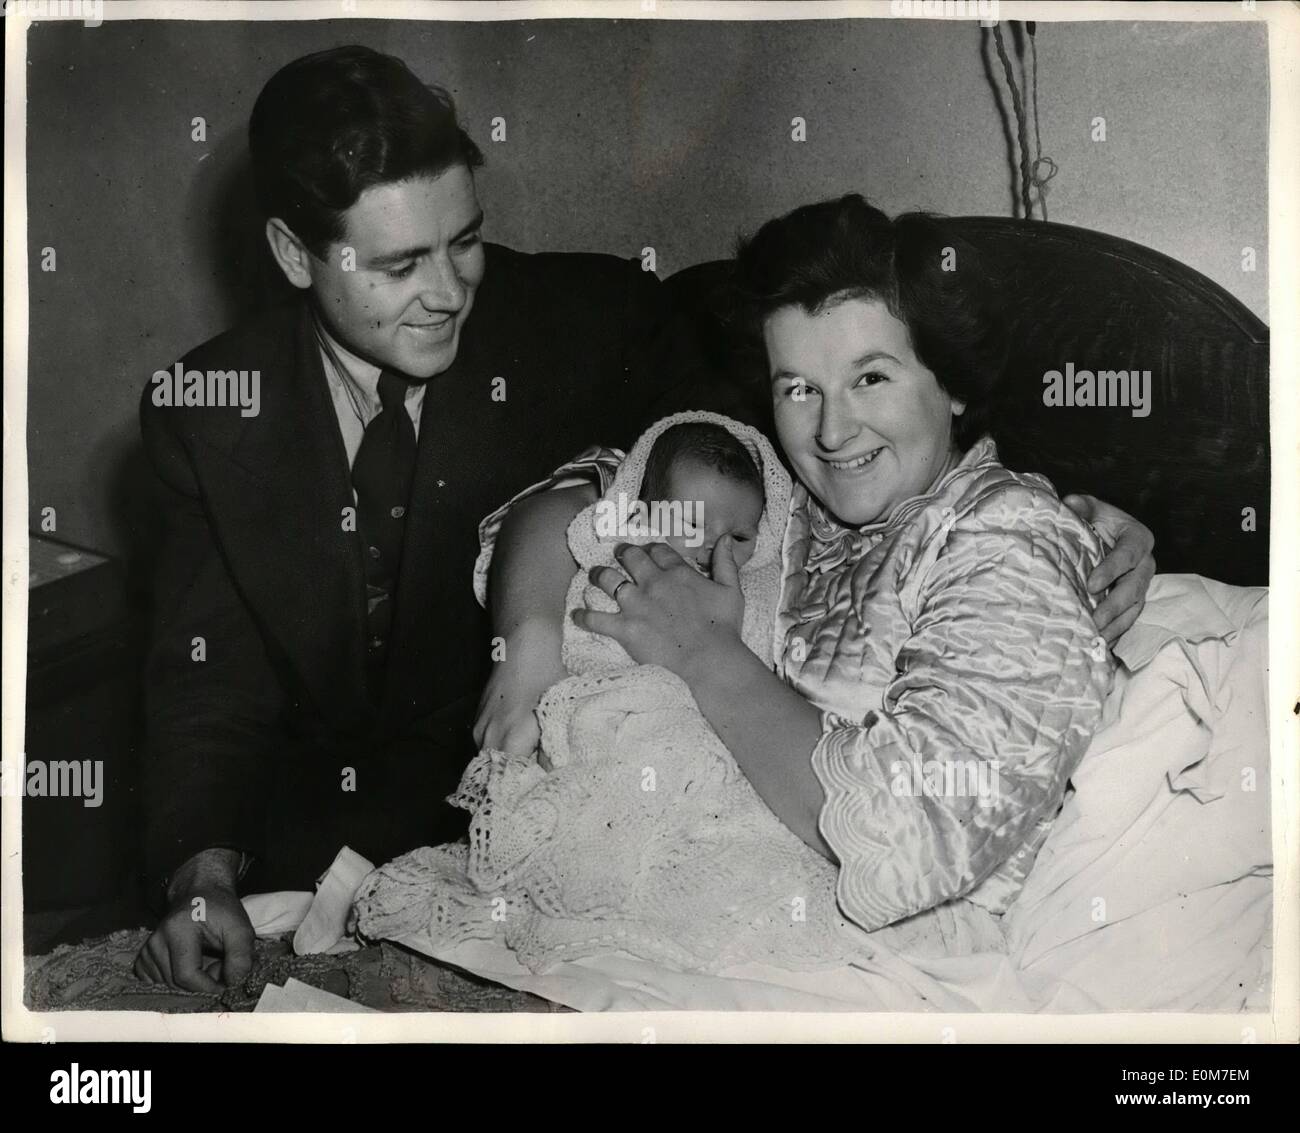 Jan. 01, 1954 - Geoff Duke and wife with their new years Eve Baby. Photo shows champion Motor Cycle racer Geoff Duke seen with his wife - and their baby son - who was born on New Year's Eve, at their Liverpool home. Stock Photo